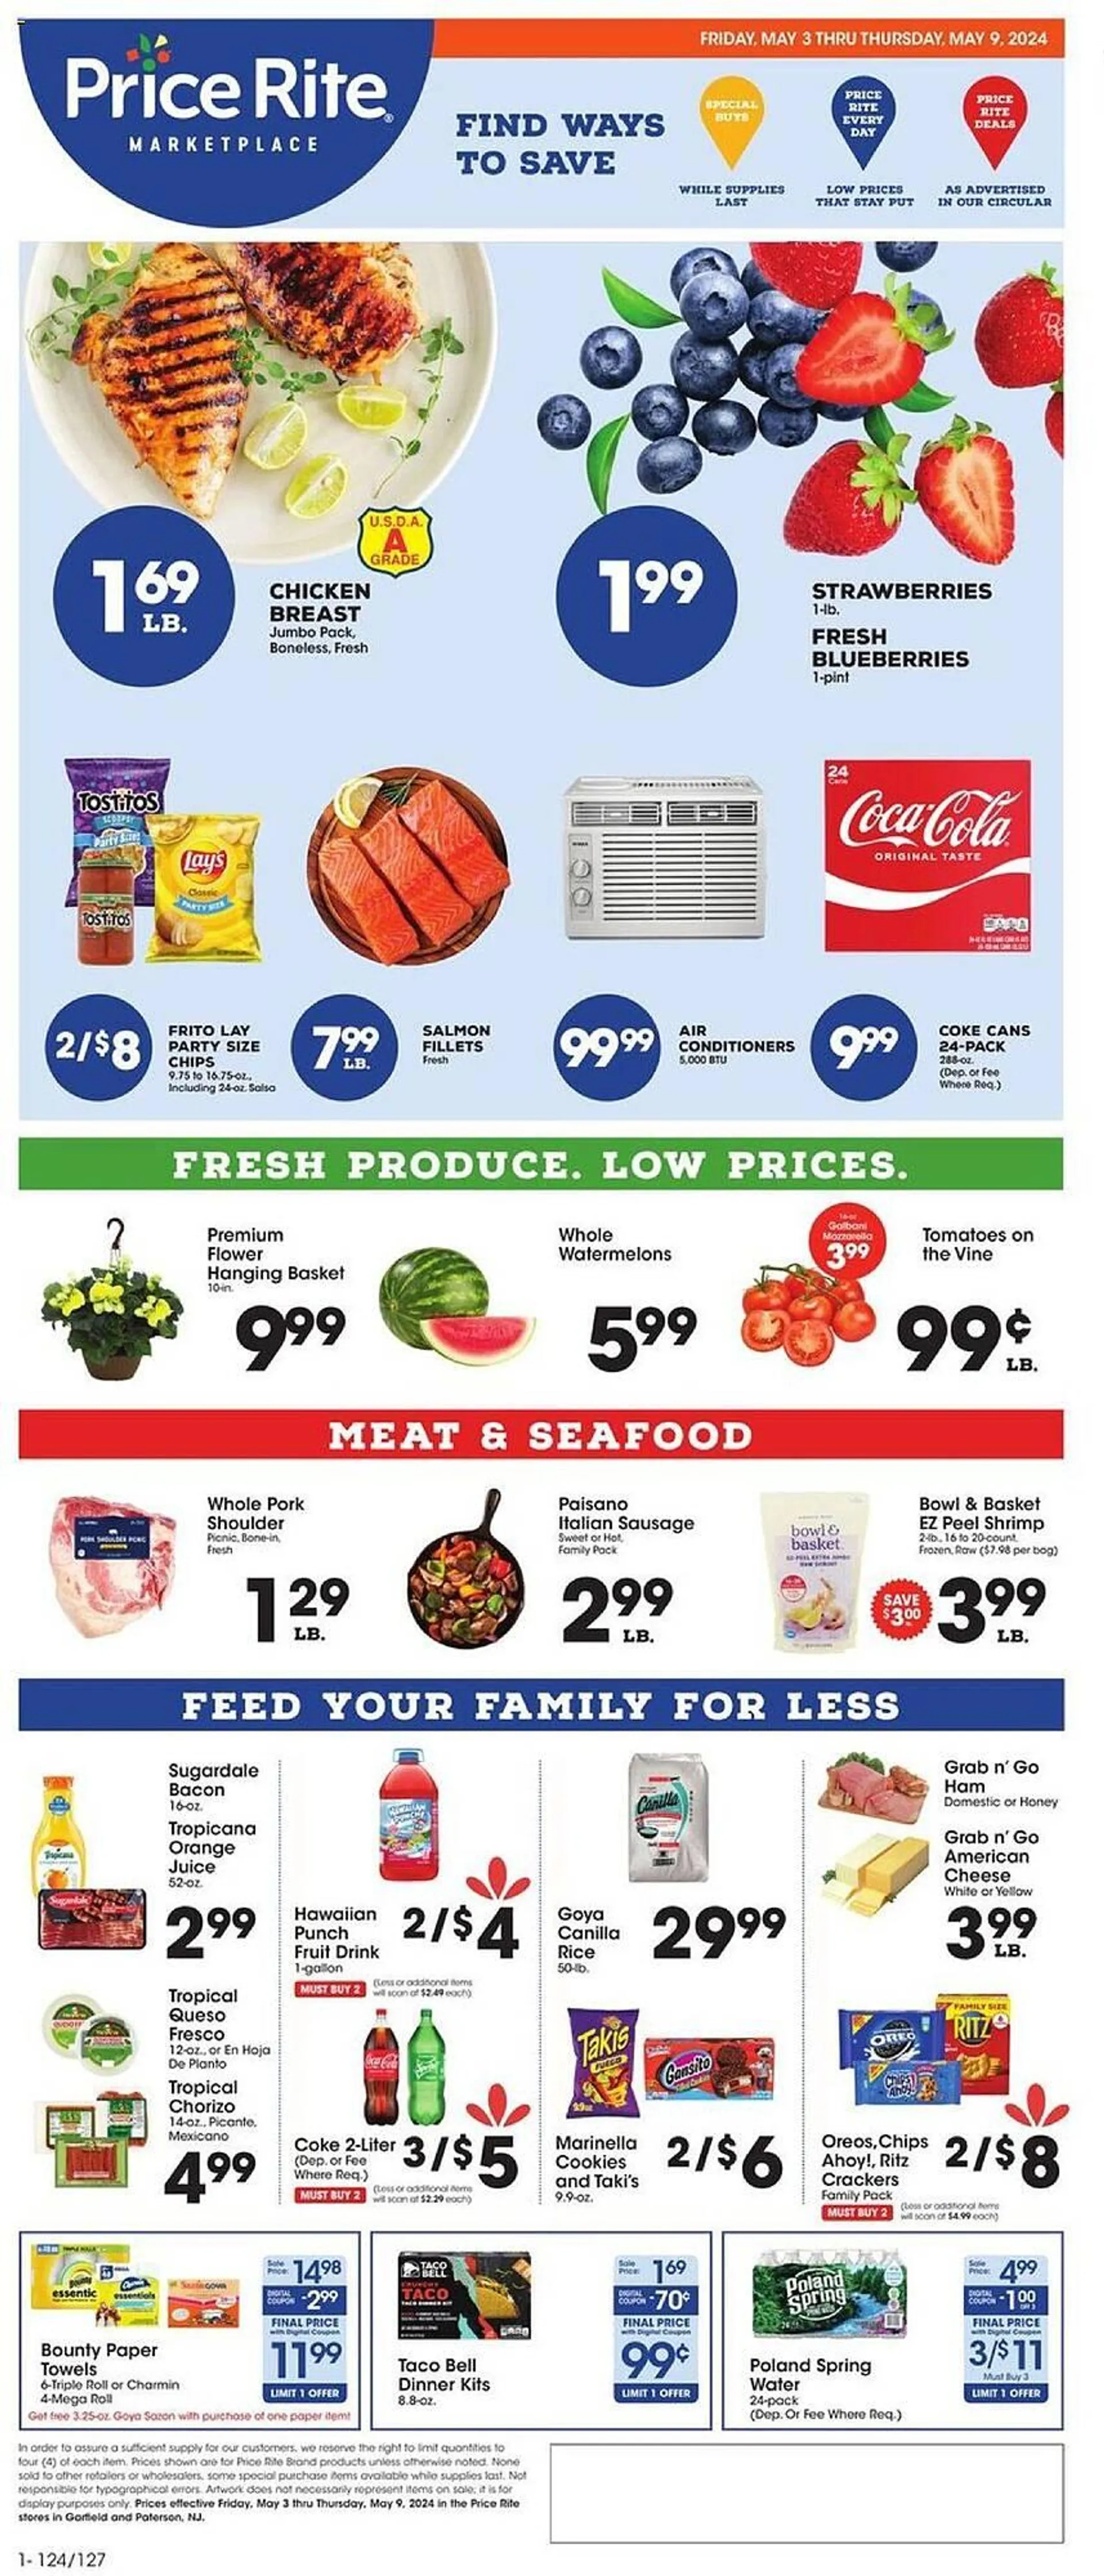 Price Rite Weekly Ad - 1